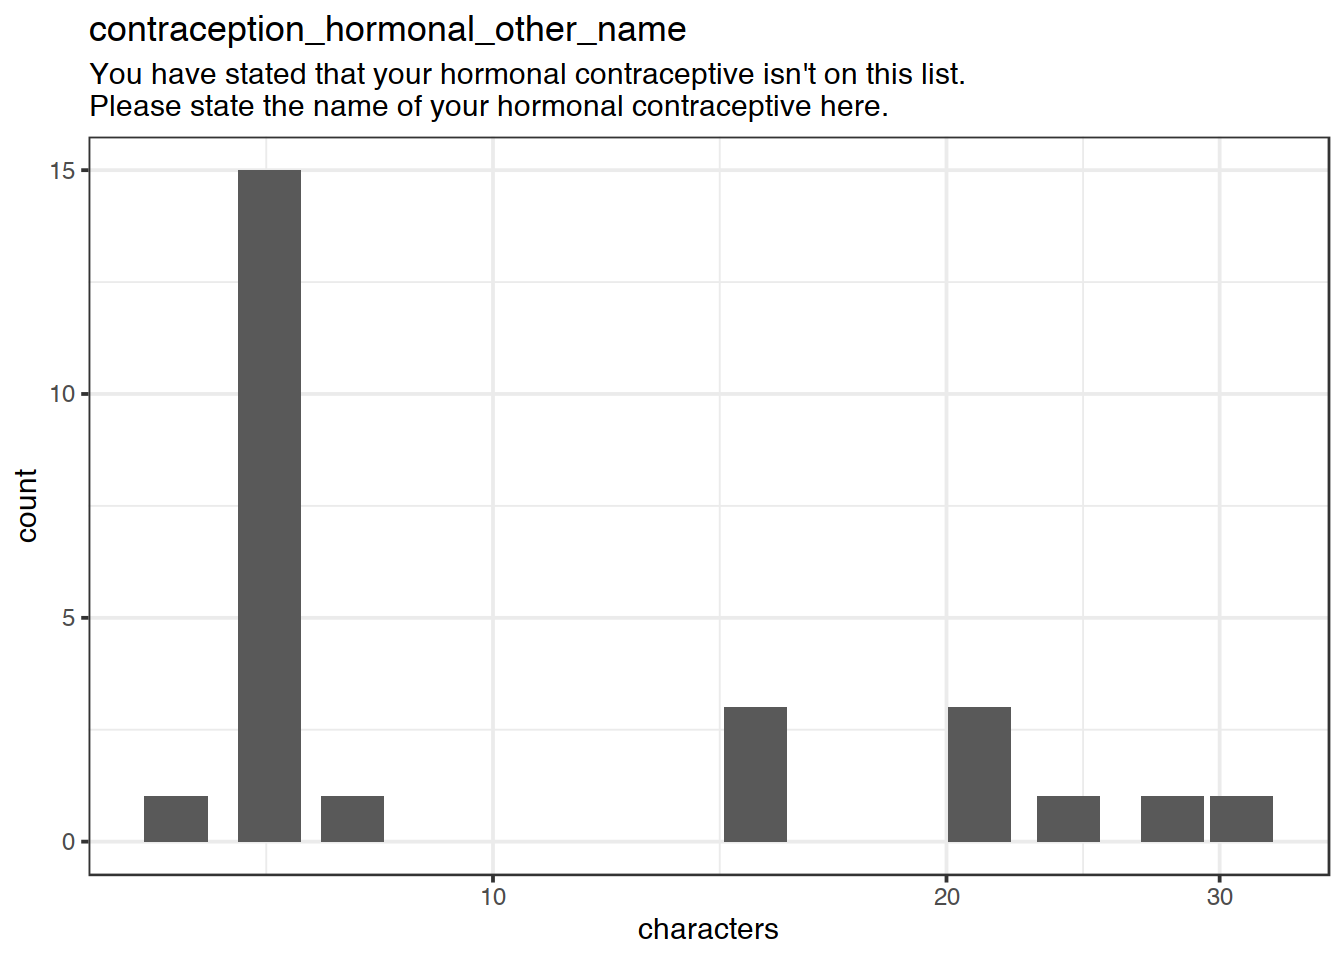 Distribution of values for contraception_hormonal_other_name